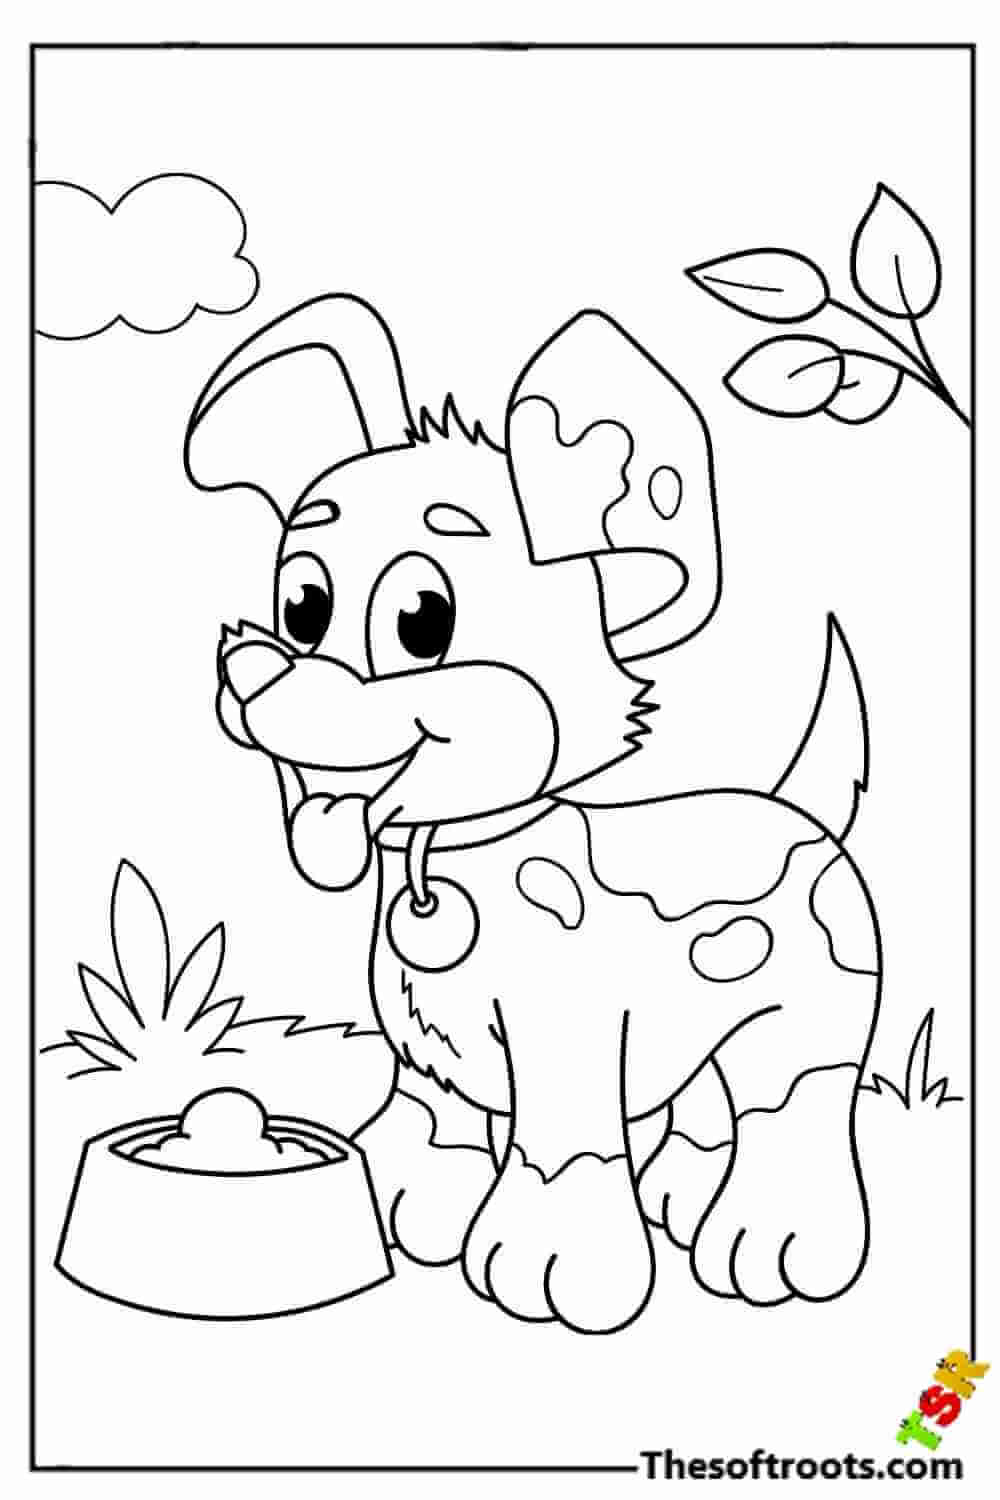 Cute puppy coloring pages